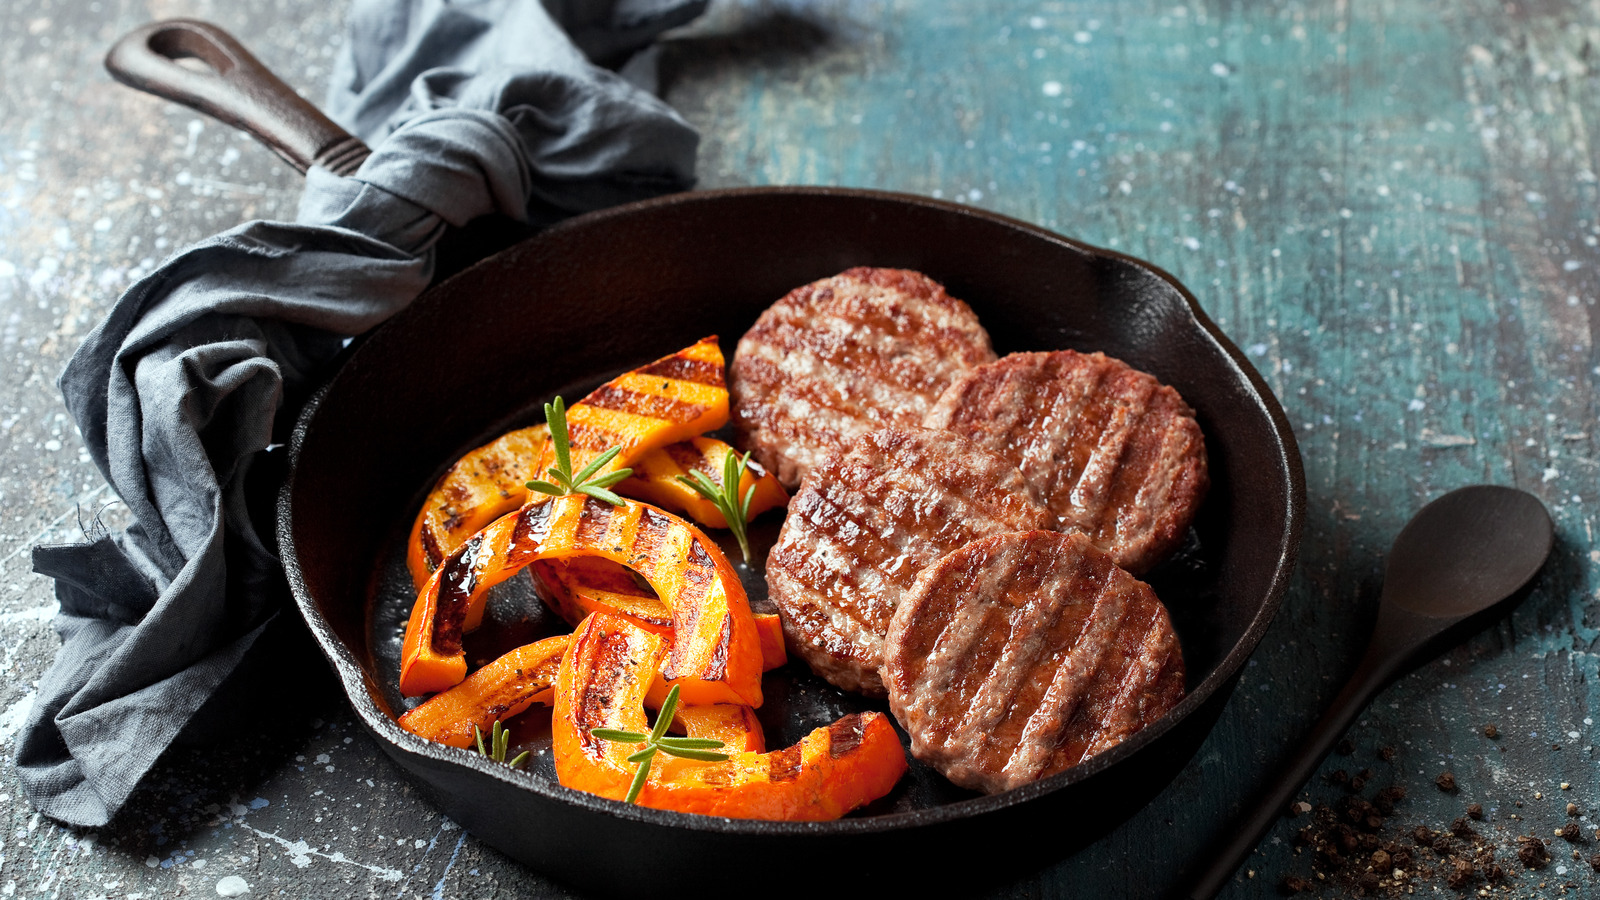 https://www.thedailymeal.com/img/gallery/trust-us-you-need-to-cook-burgers-in-a-cast-iron-pan/l-intro-1696286317.jpg